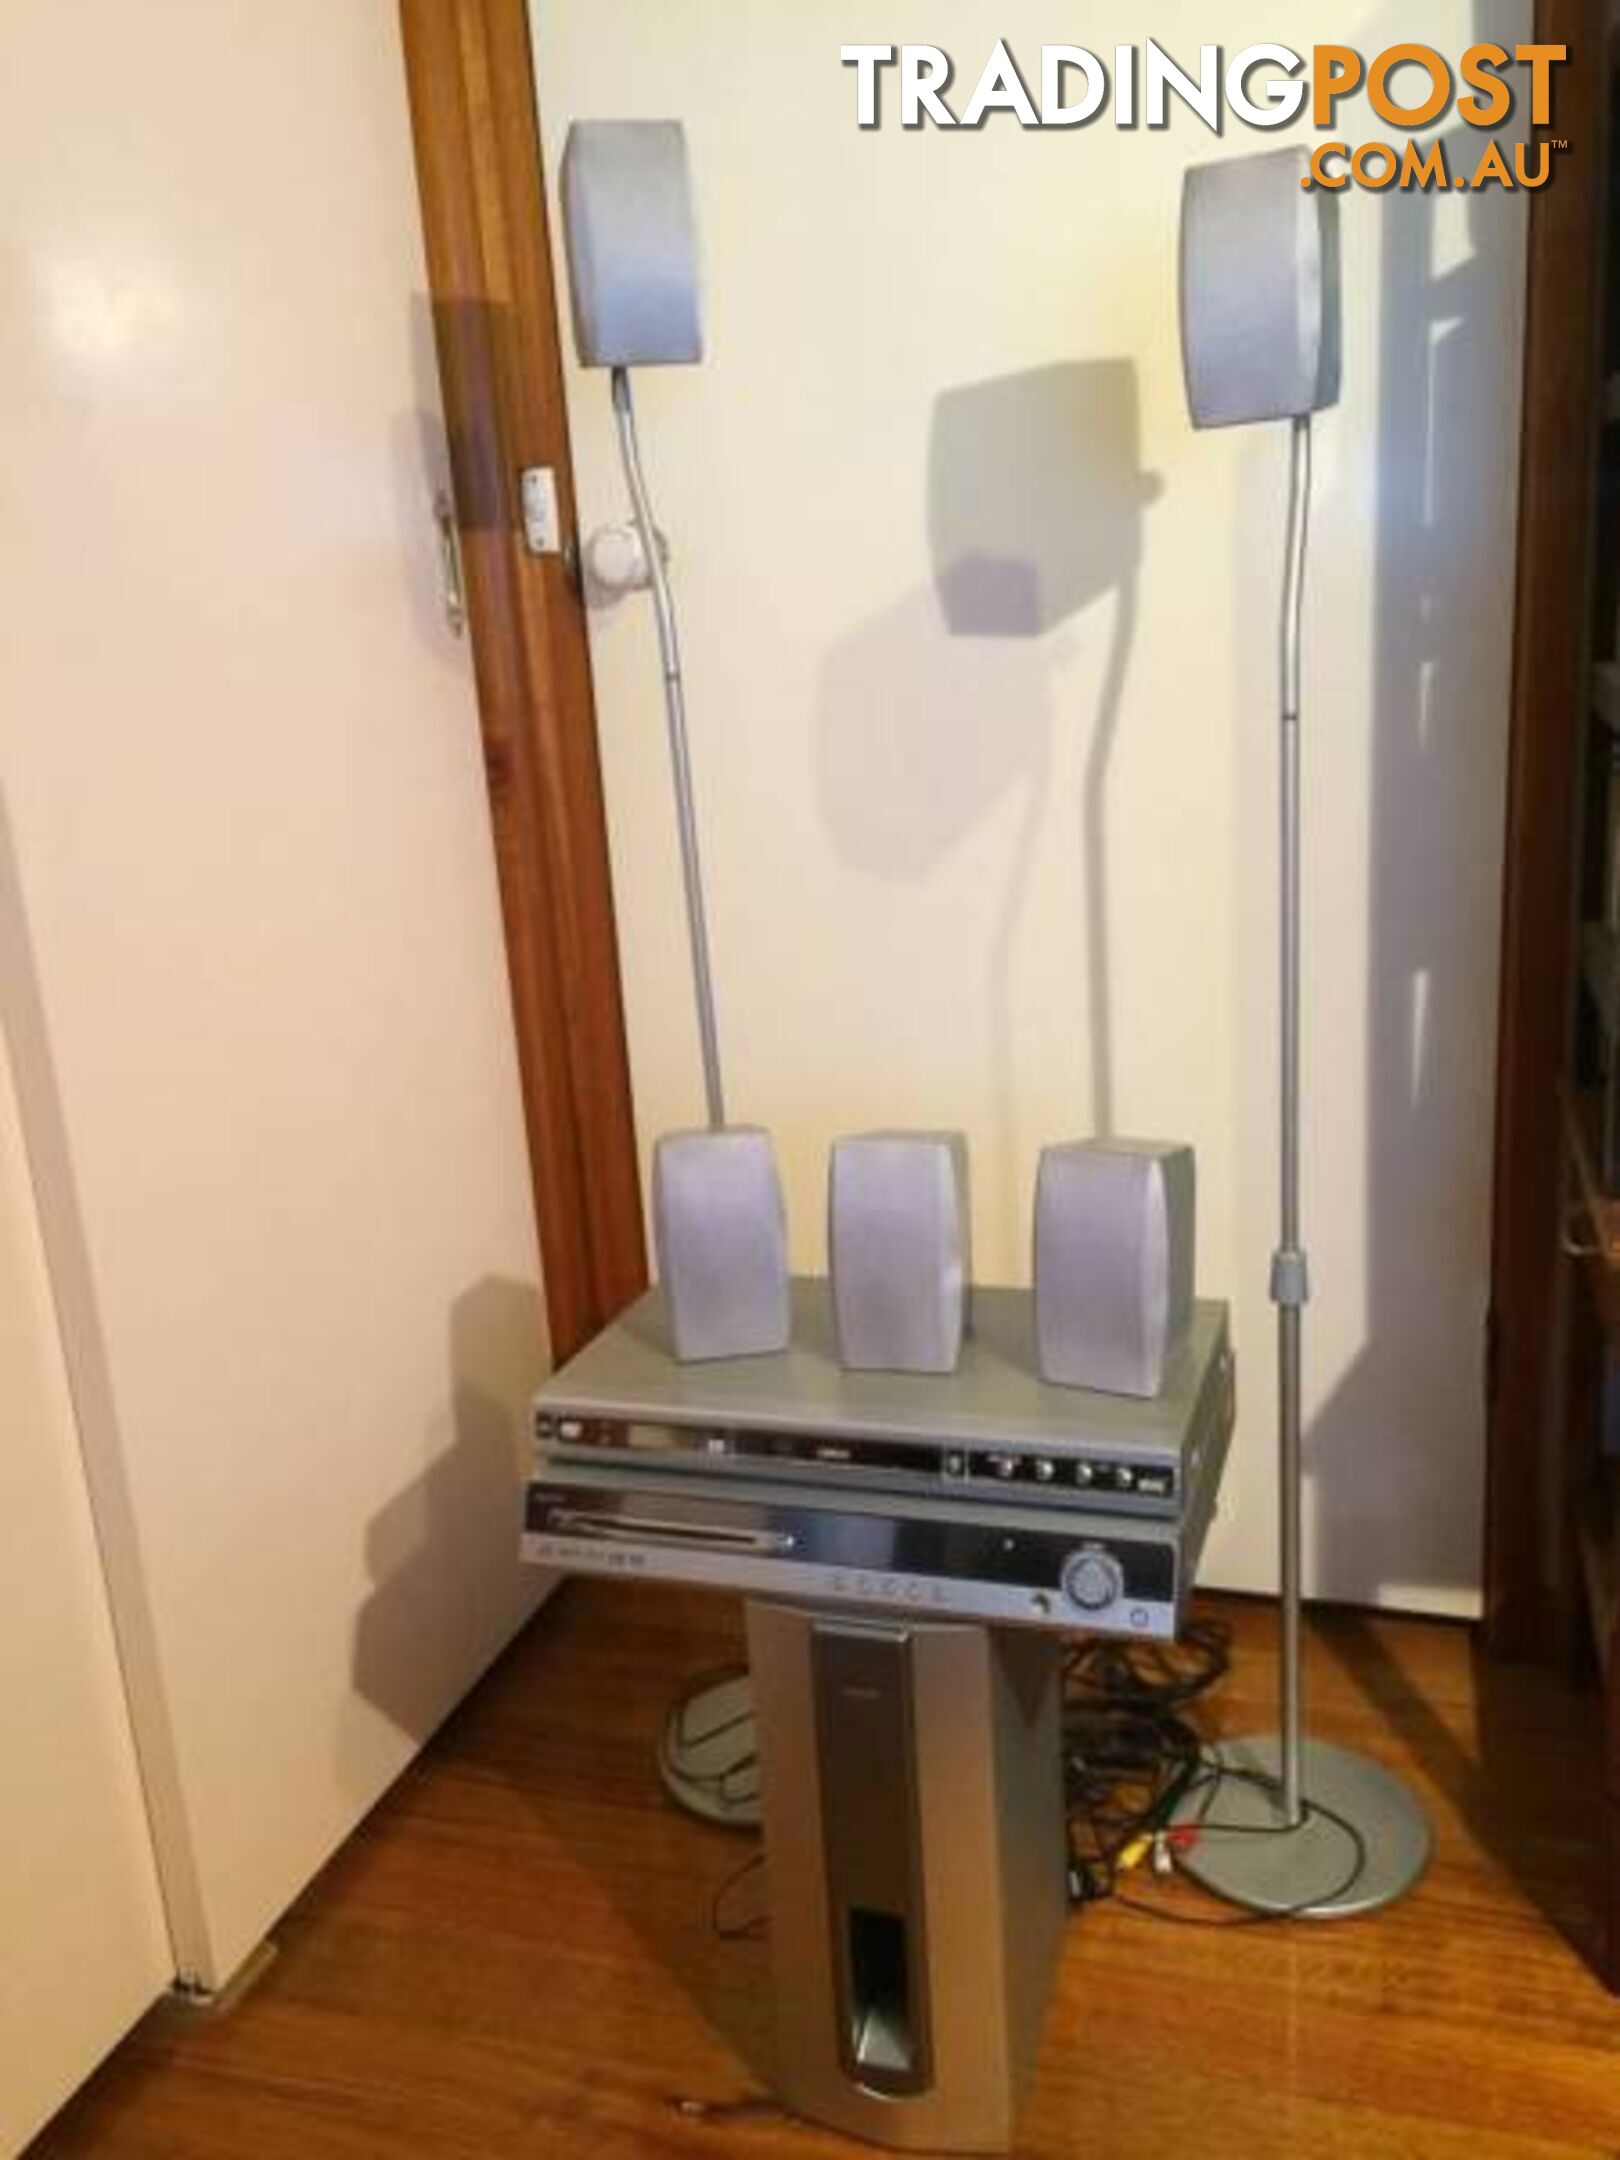 SANYO 5.1 SURROUND SOUND SYSTEM WITH 2 SPEAKER STANDS INCLUDED